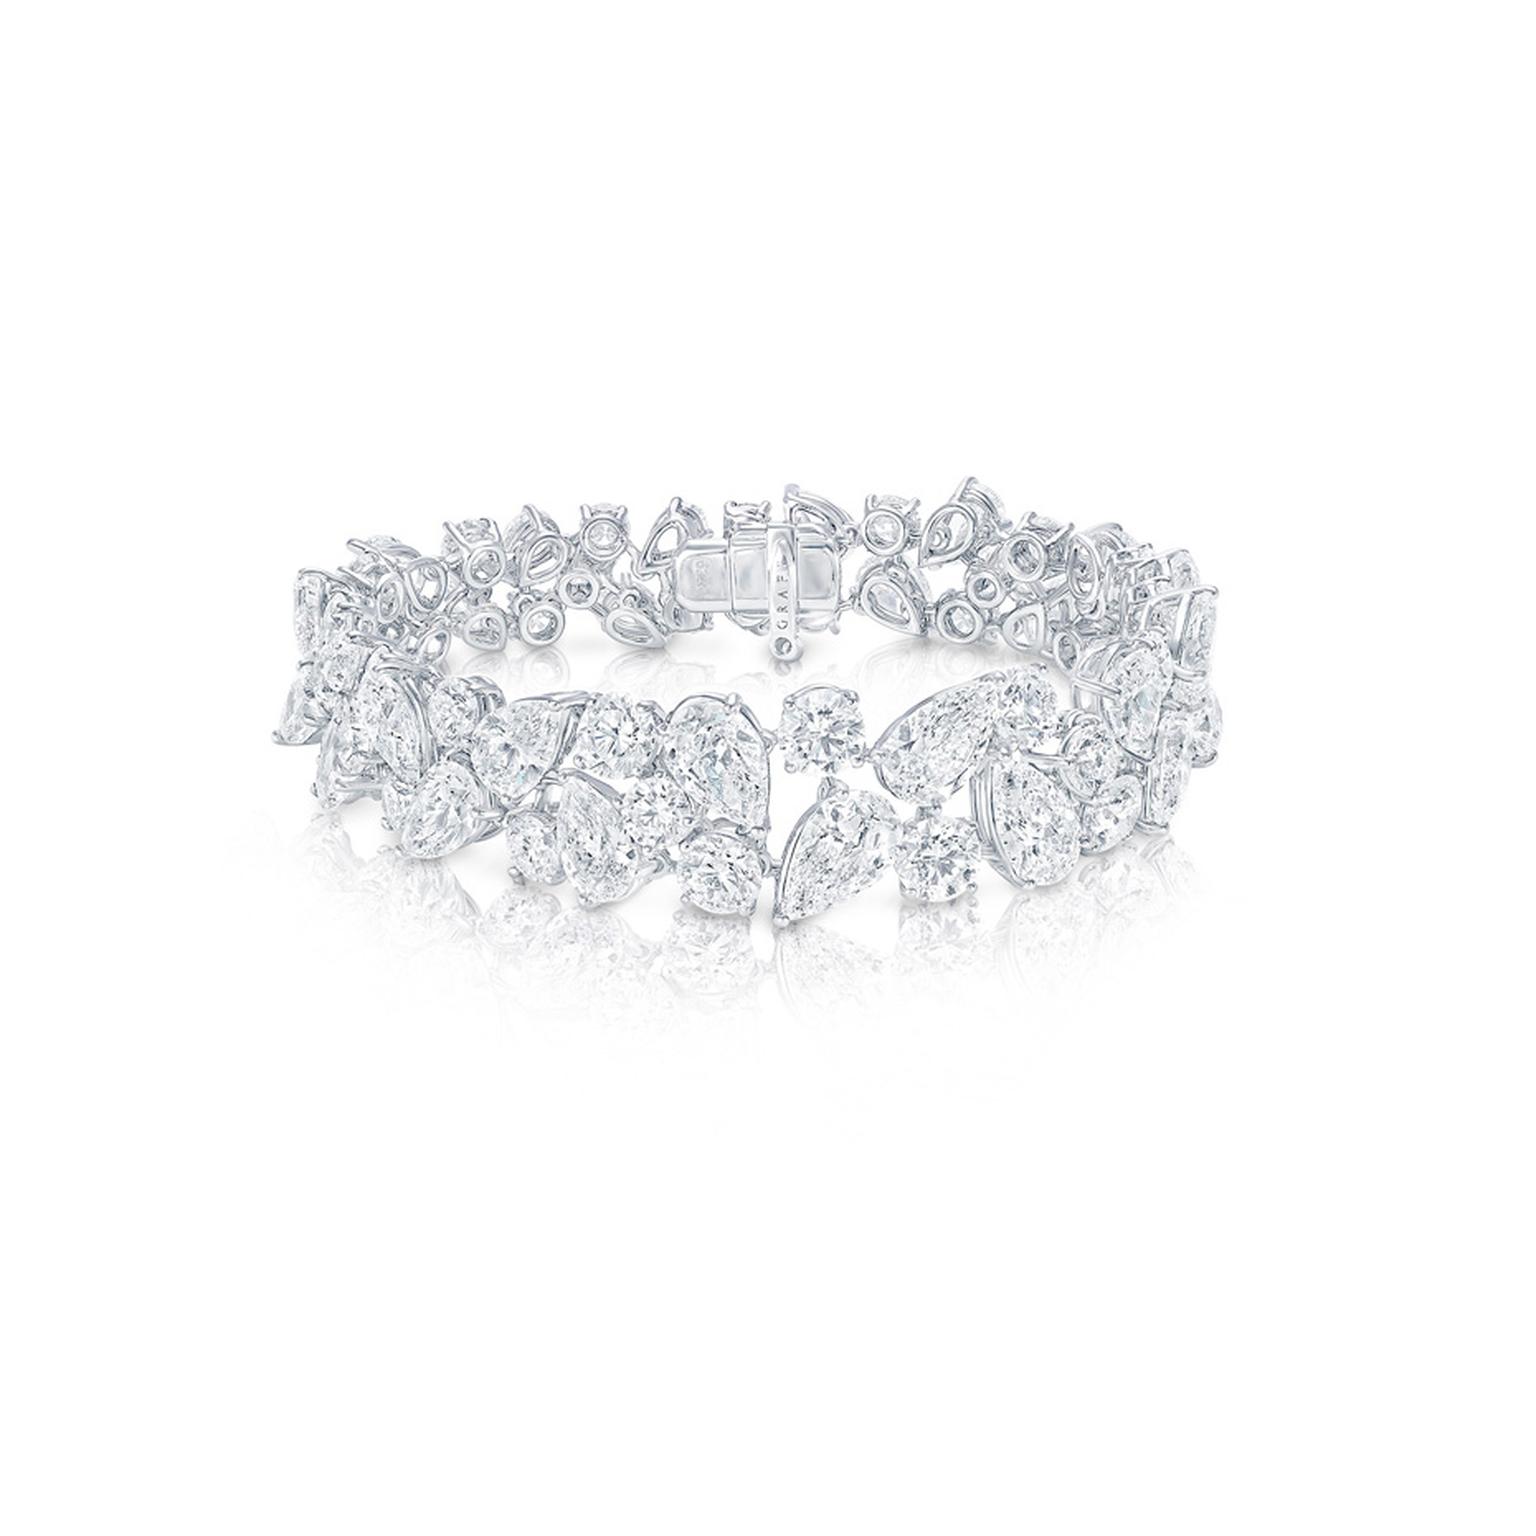 Graff Rhythm collection ring featuring brilliant, pear and marquise shaped diamonds.